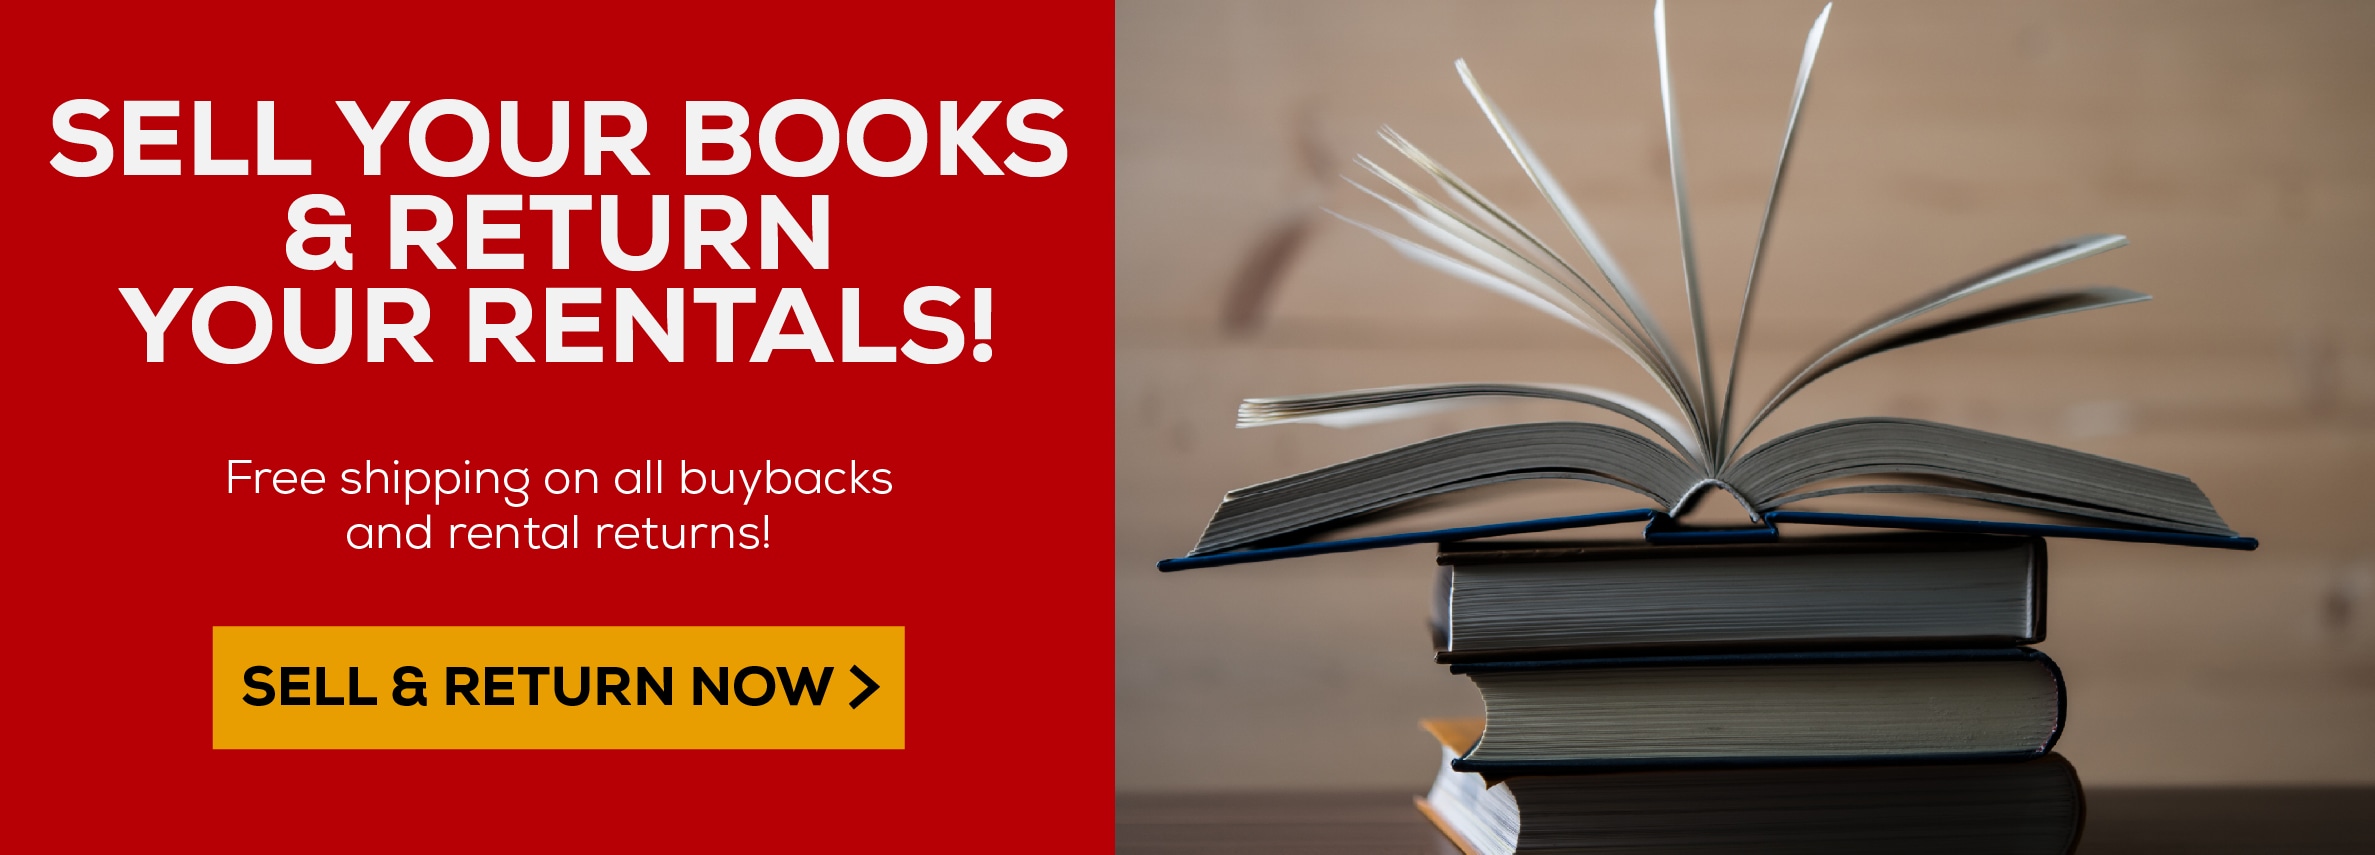 Sell your books and return your rentals online! Free shipping on all buybacks and rental returns. Sell and return now.